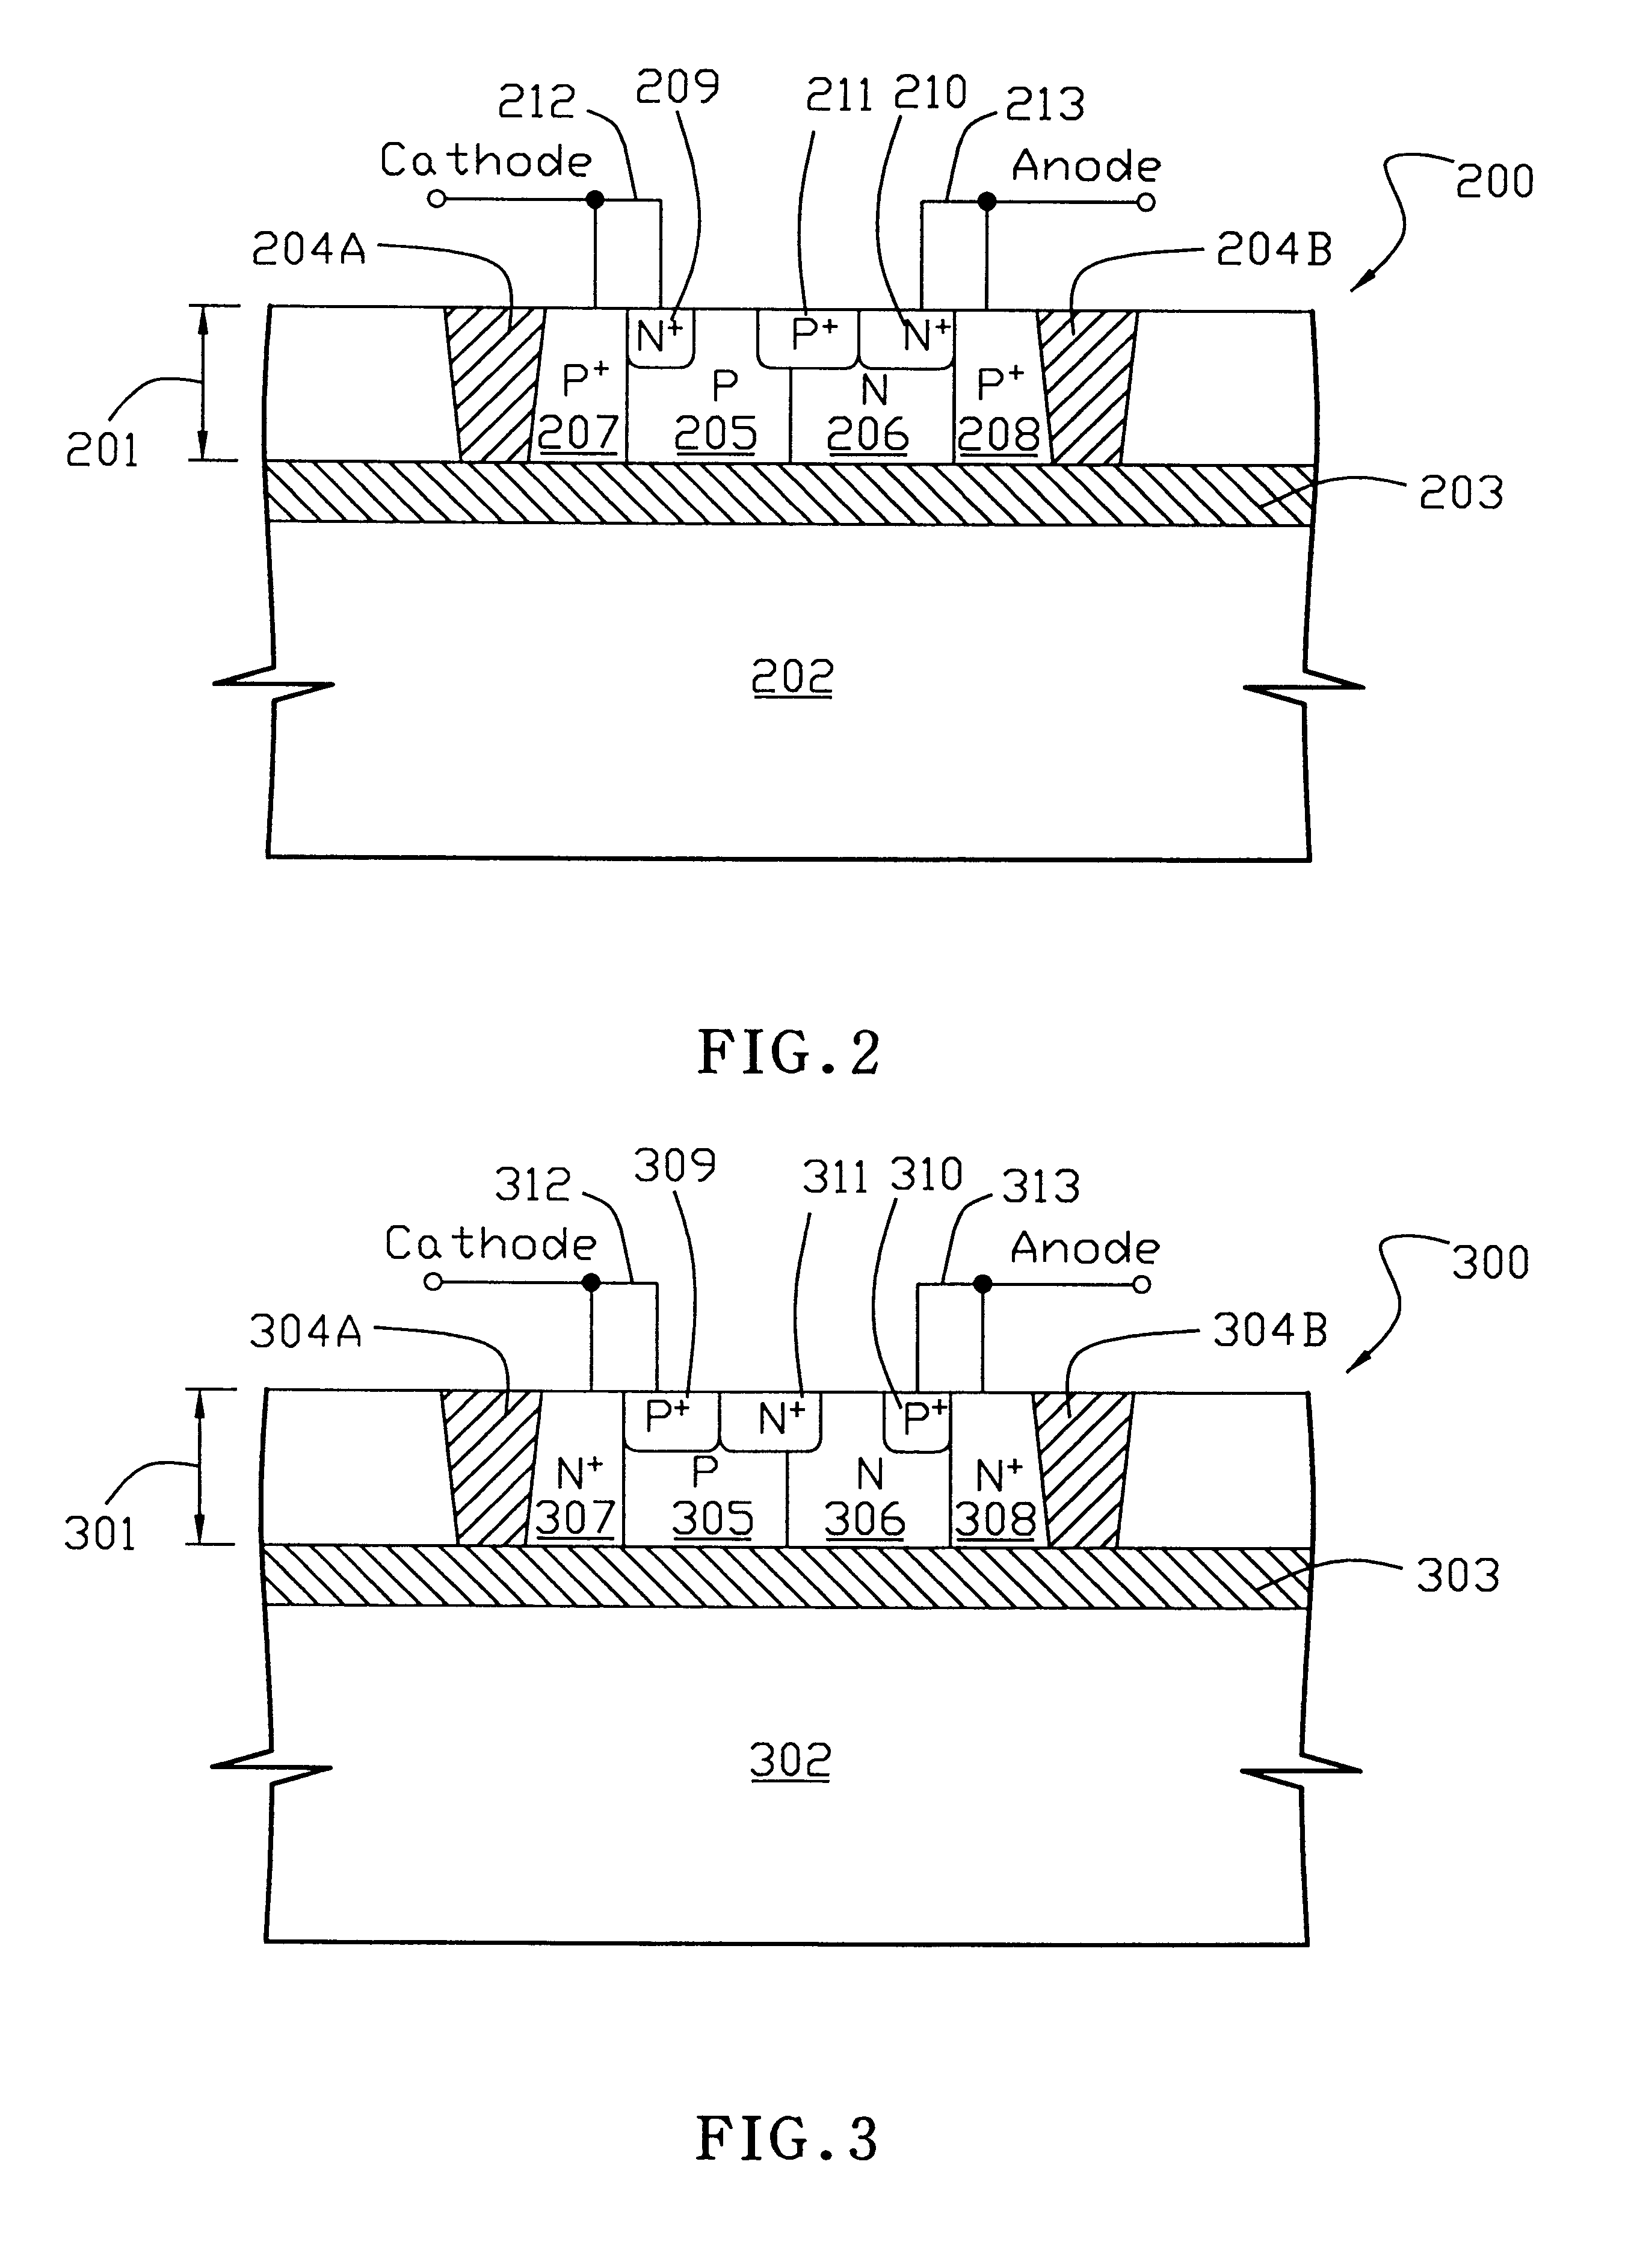 Low triggering voltage SOI silicon-control-rectifier (SCR) structure